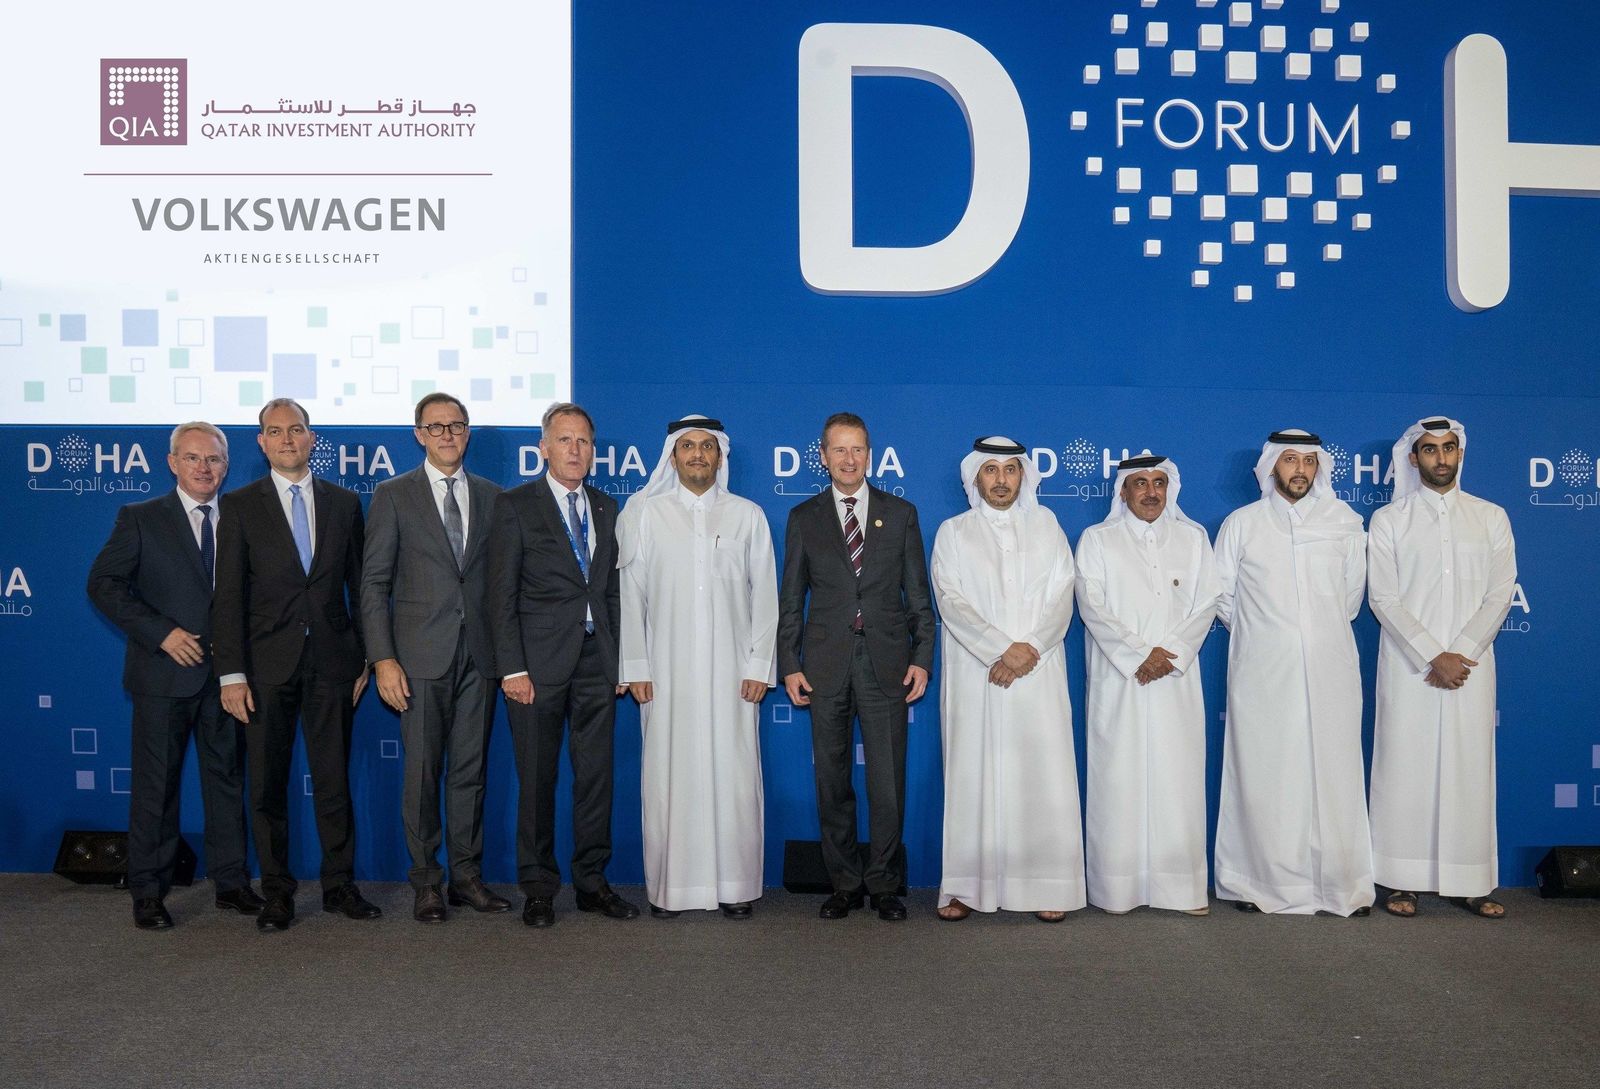 Volkswagen and QIA signing ceremony